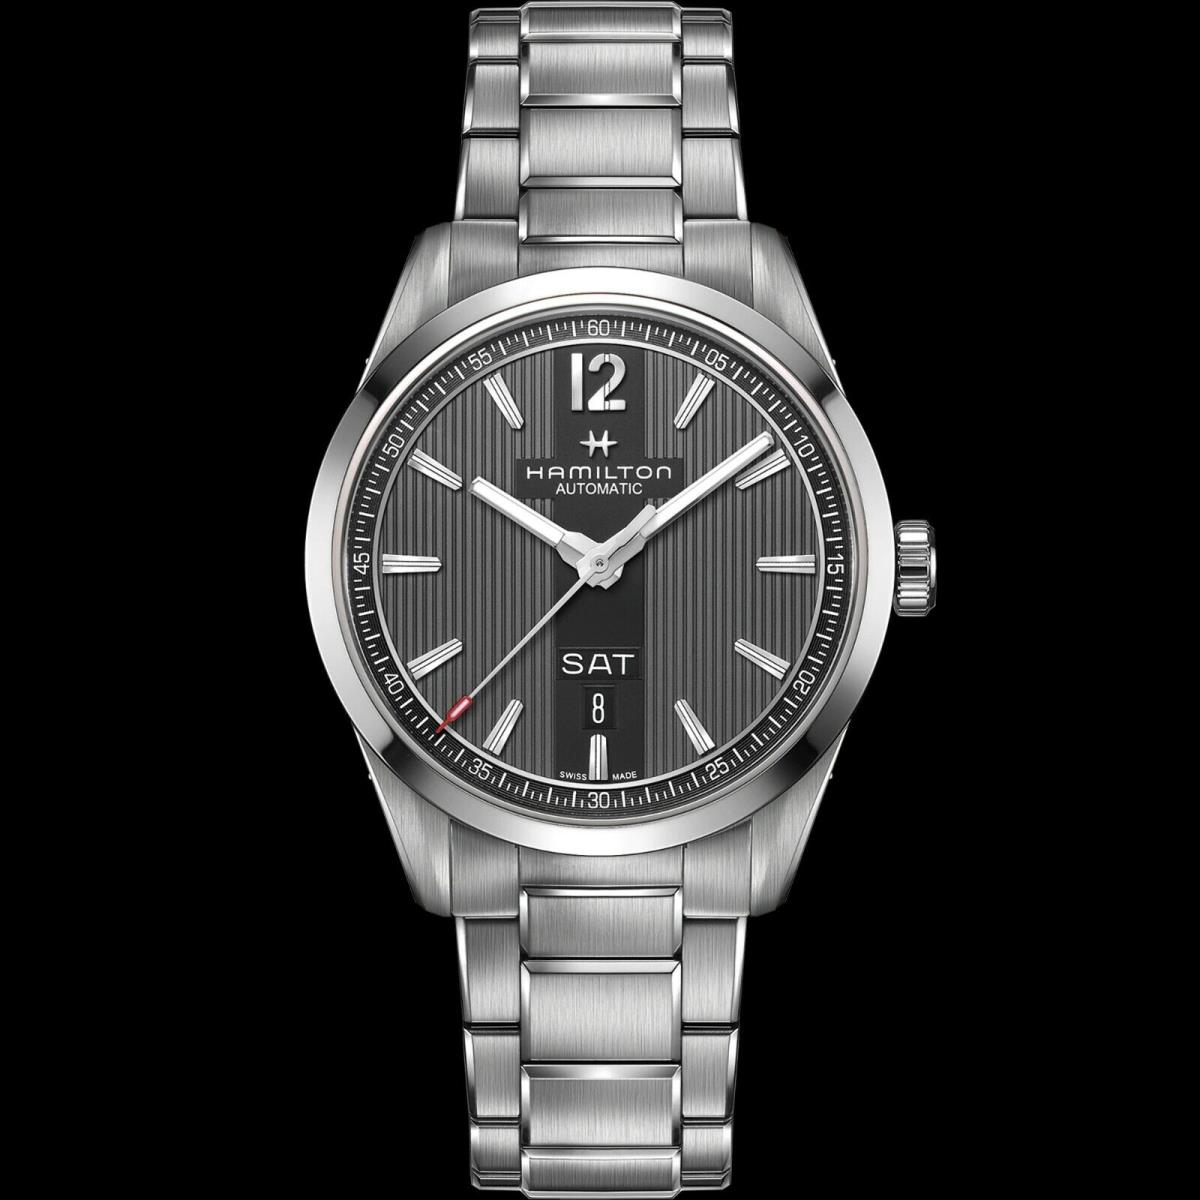 Hamilton Mens Silver Automatic Day/date Broadway Swiss Watch H43515135 - Dial: Black, Band: Silver, Bezel: Silver